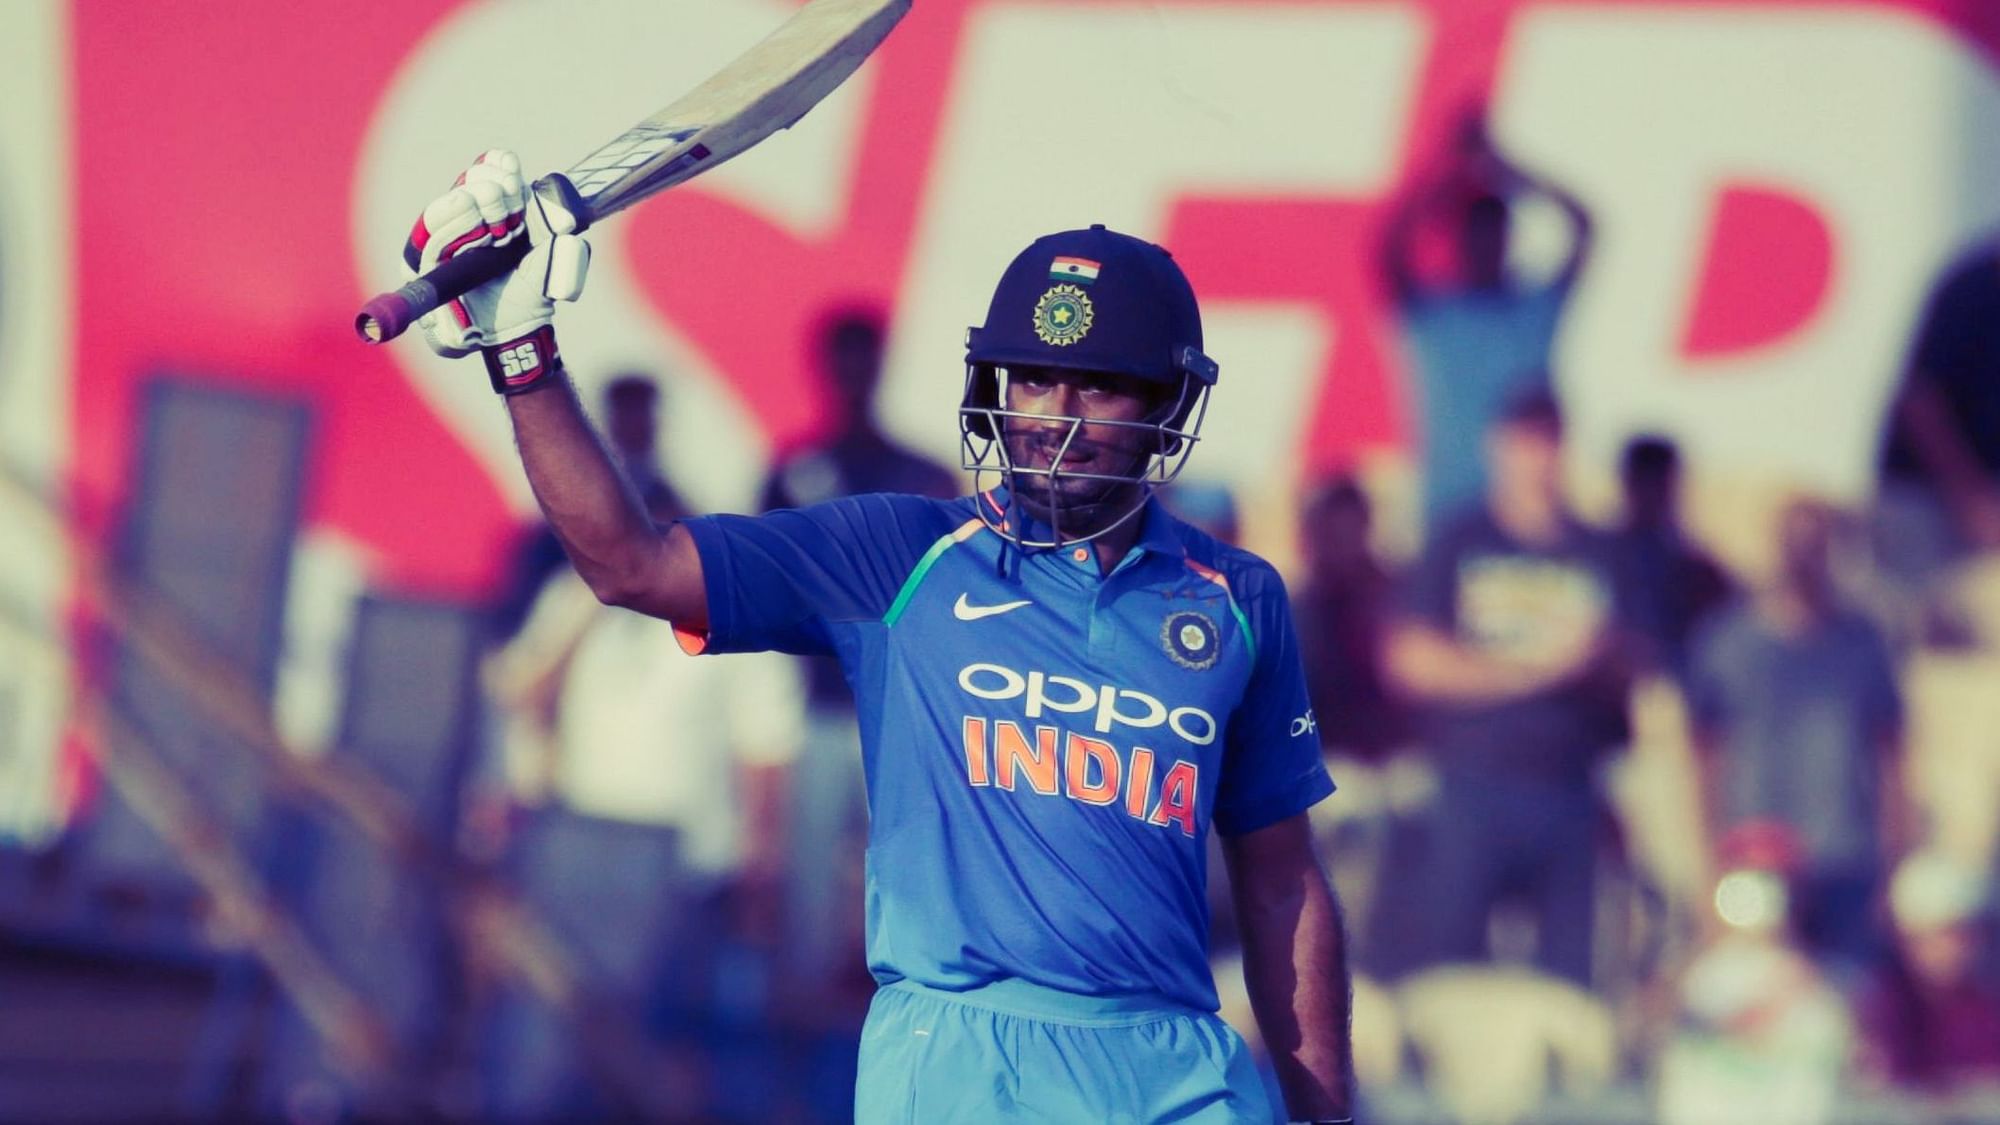  Ambati Rayudu will be remembered as someone who could not live up to his rare cricketing talent.